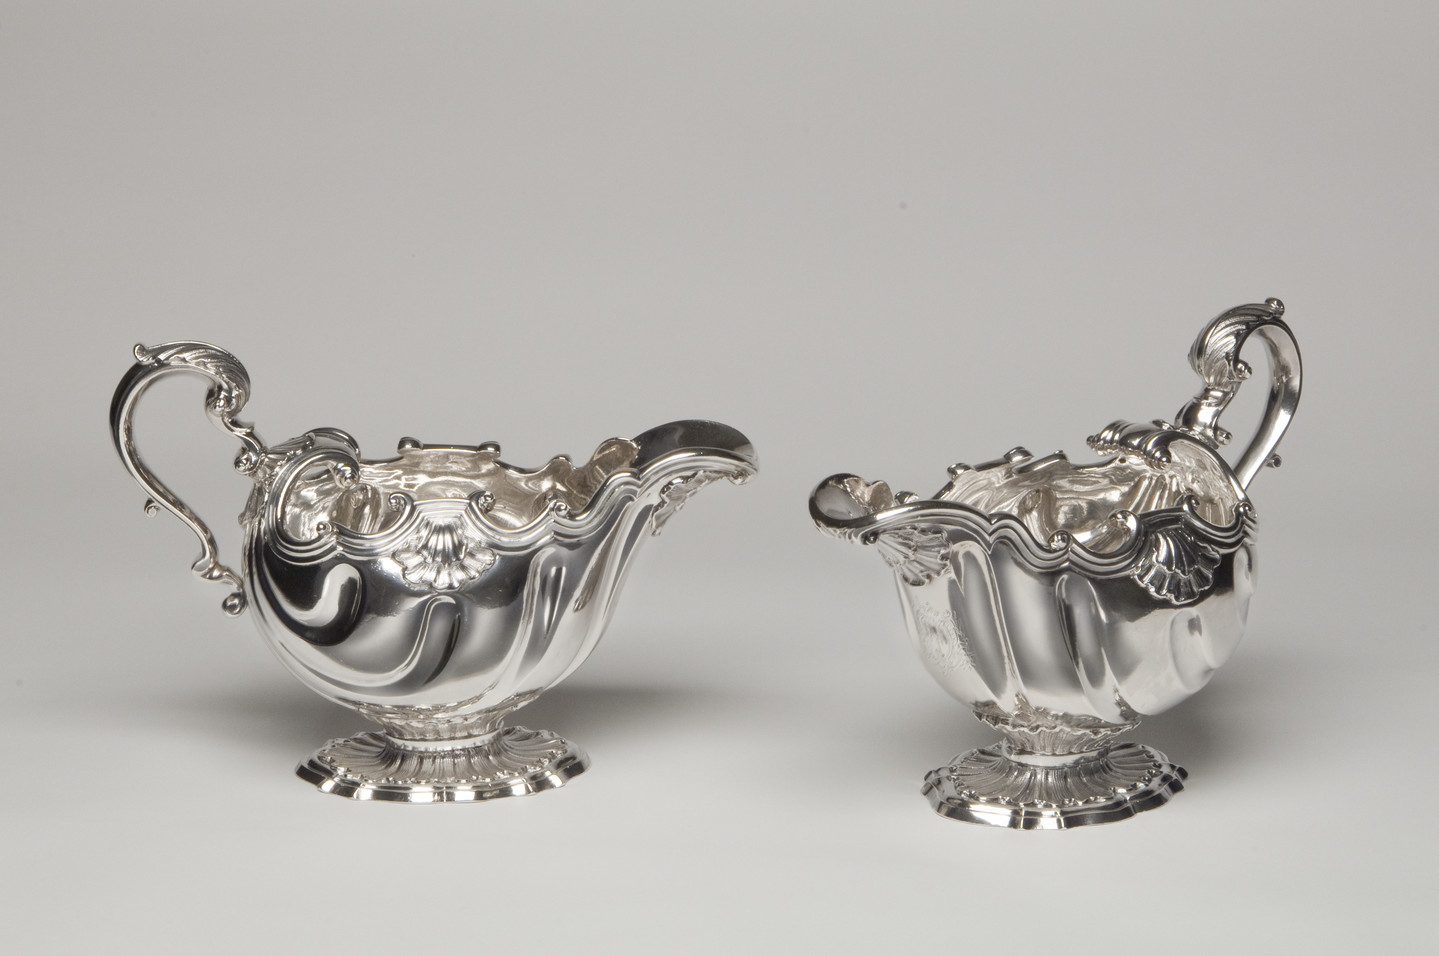 Two silversauce boats decorated with ornate, rococo scrolls, and shells.